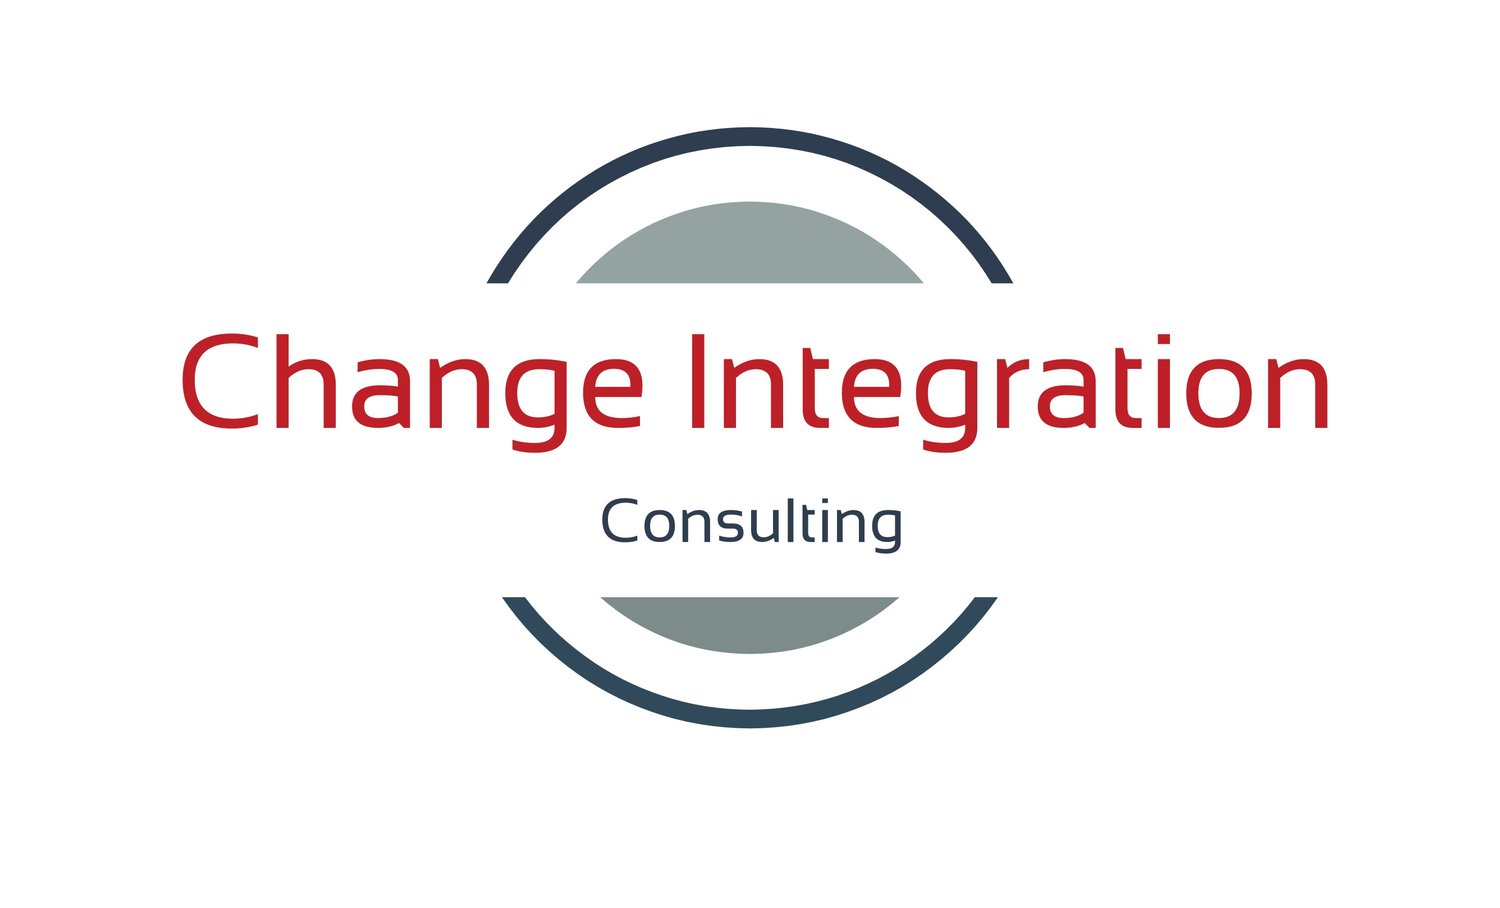 Change Integration Consulting